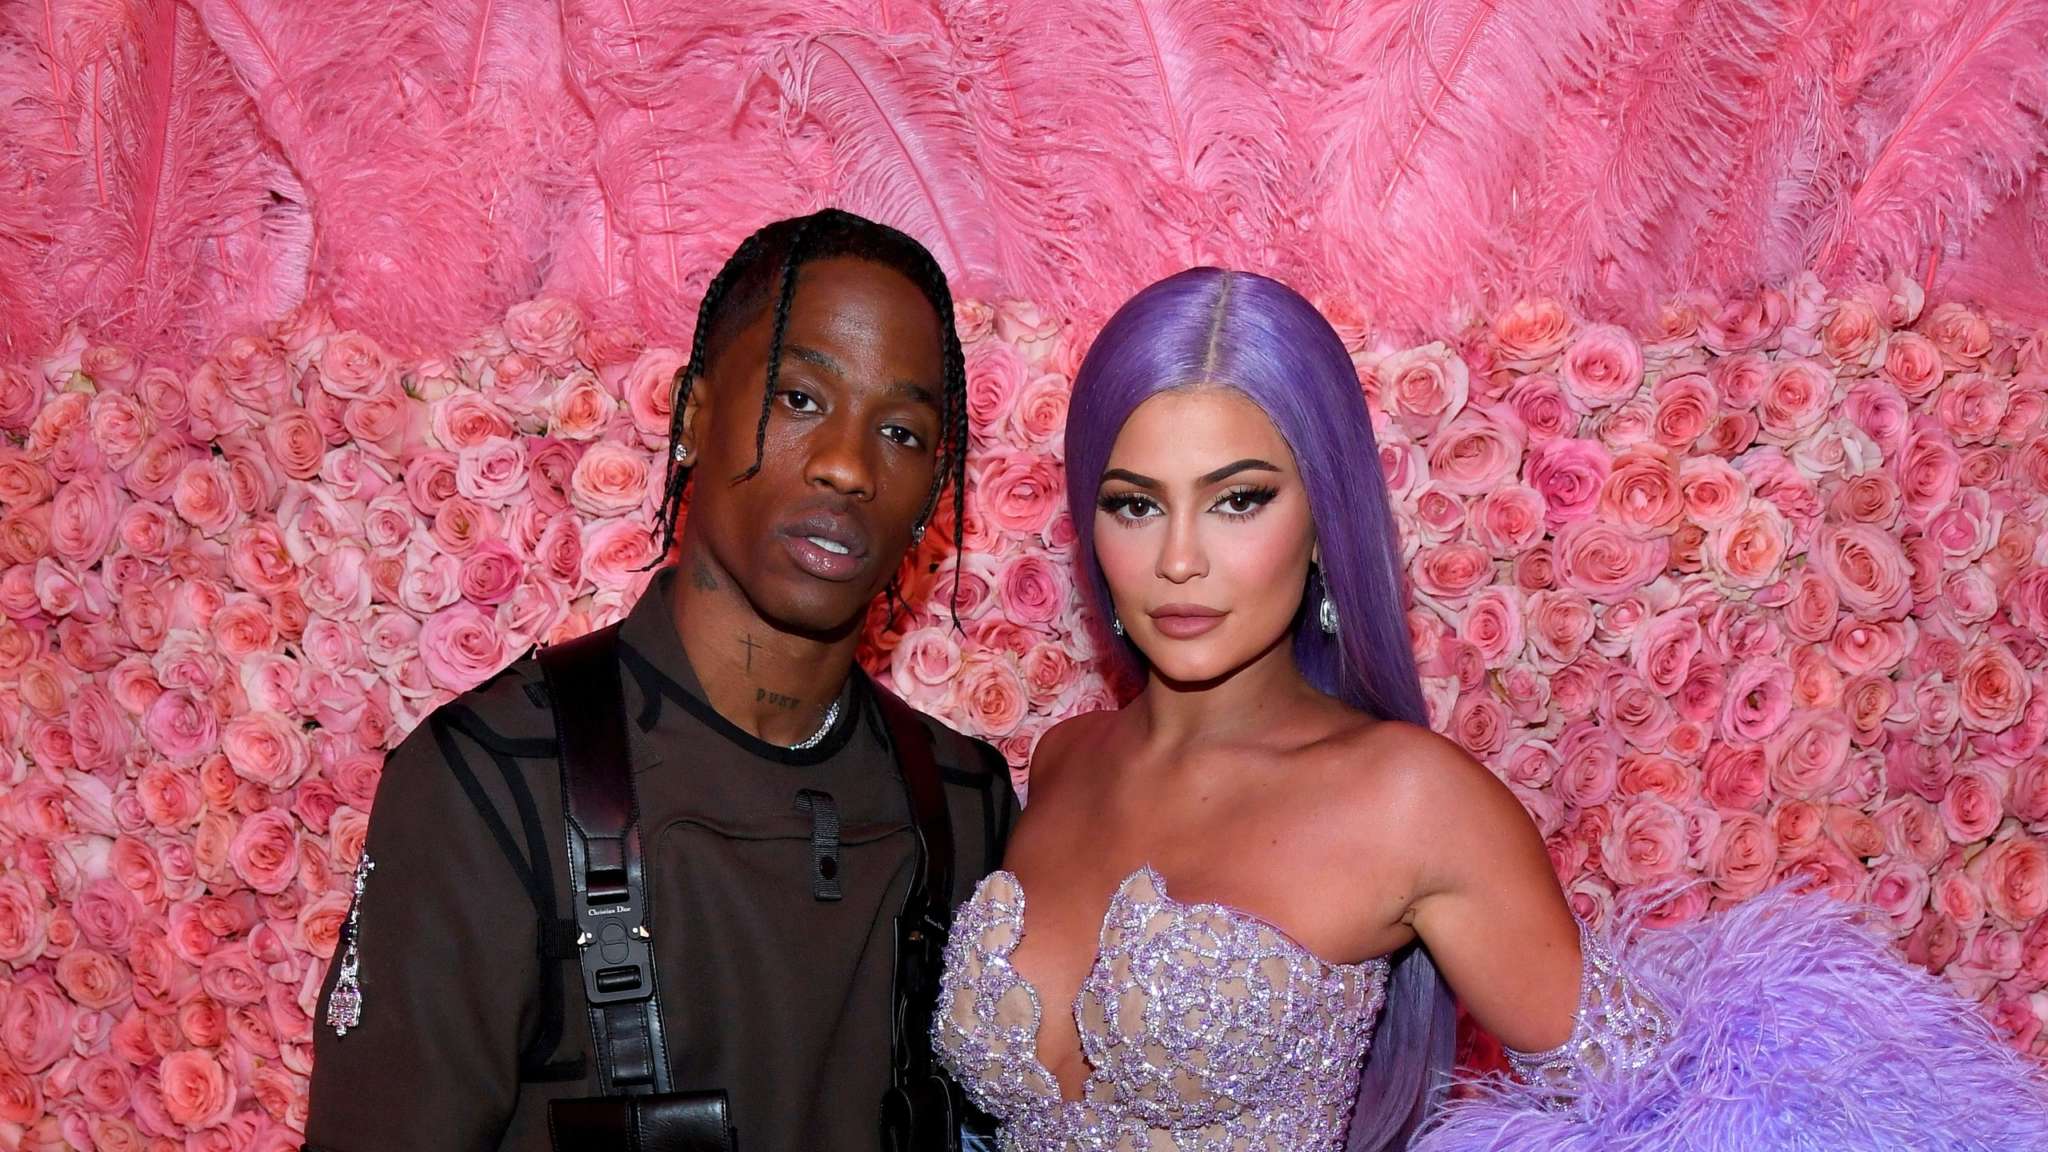 Kylie Jenner Poses Only In Lingerie And Travis Scott's Recent IG Message Seems To Target Her